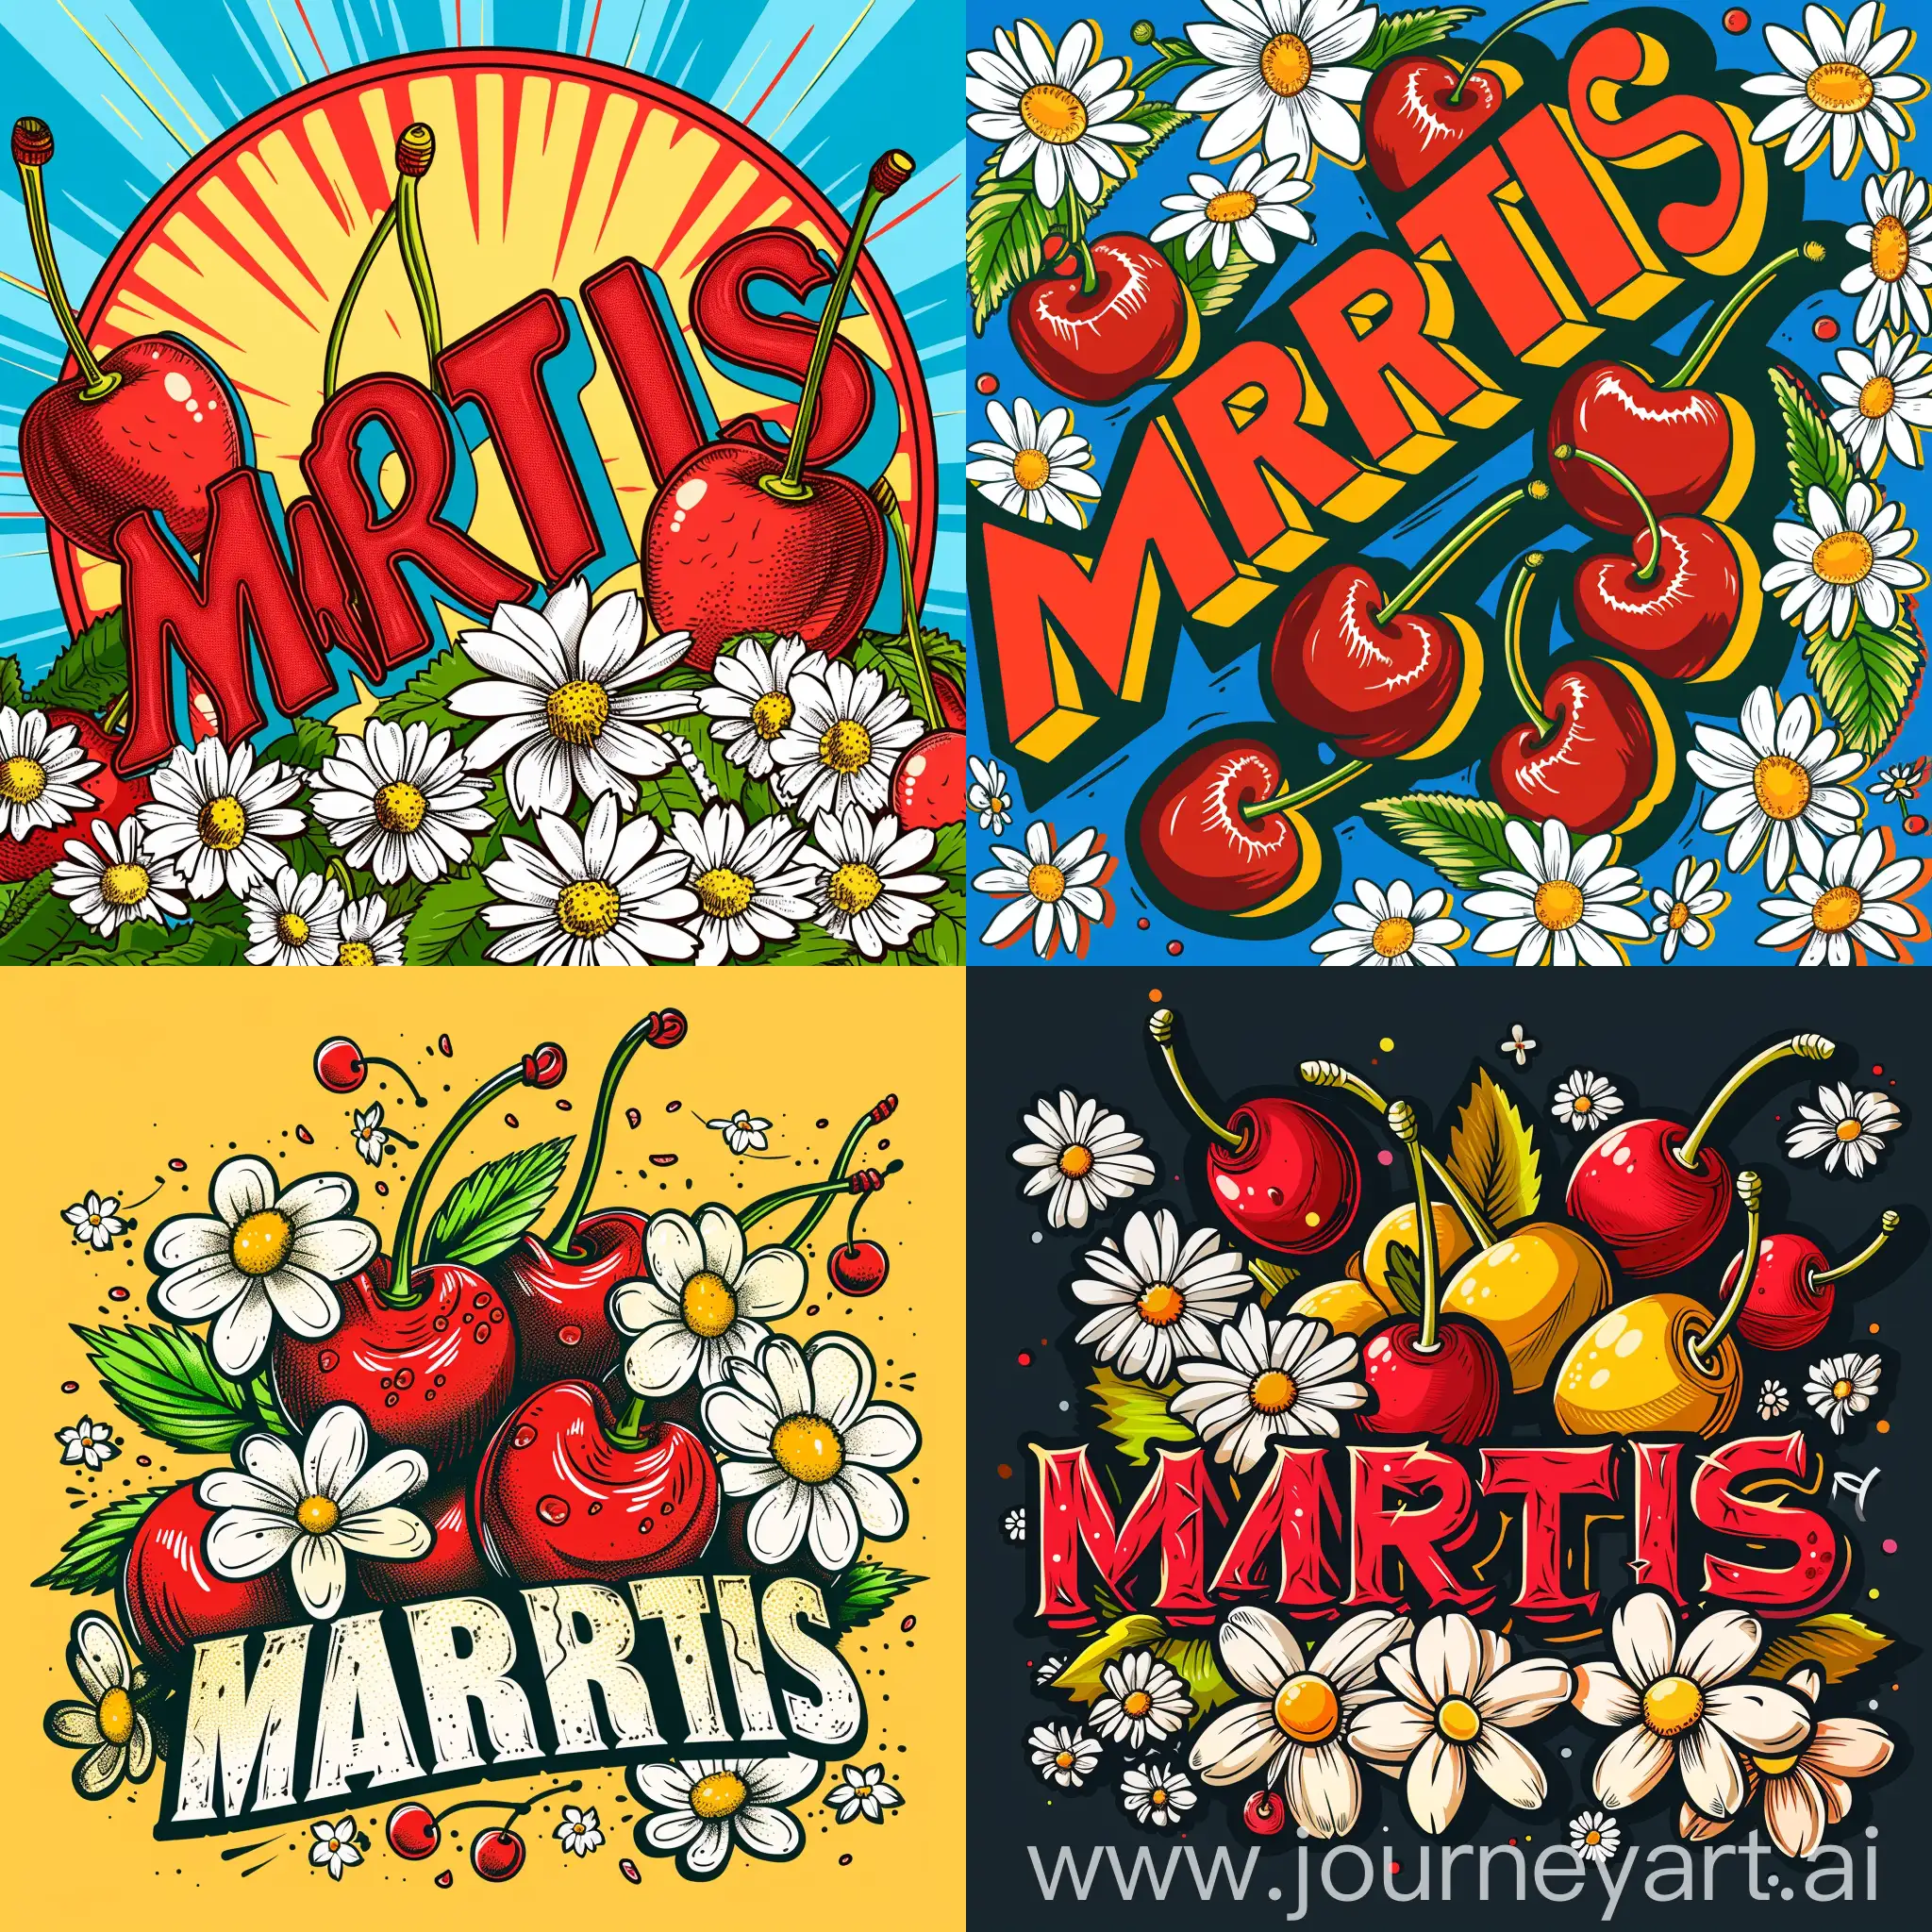 Colorful-Pop-Art-Logo-of-MARTIS-with-Cherries-and-Daisies